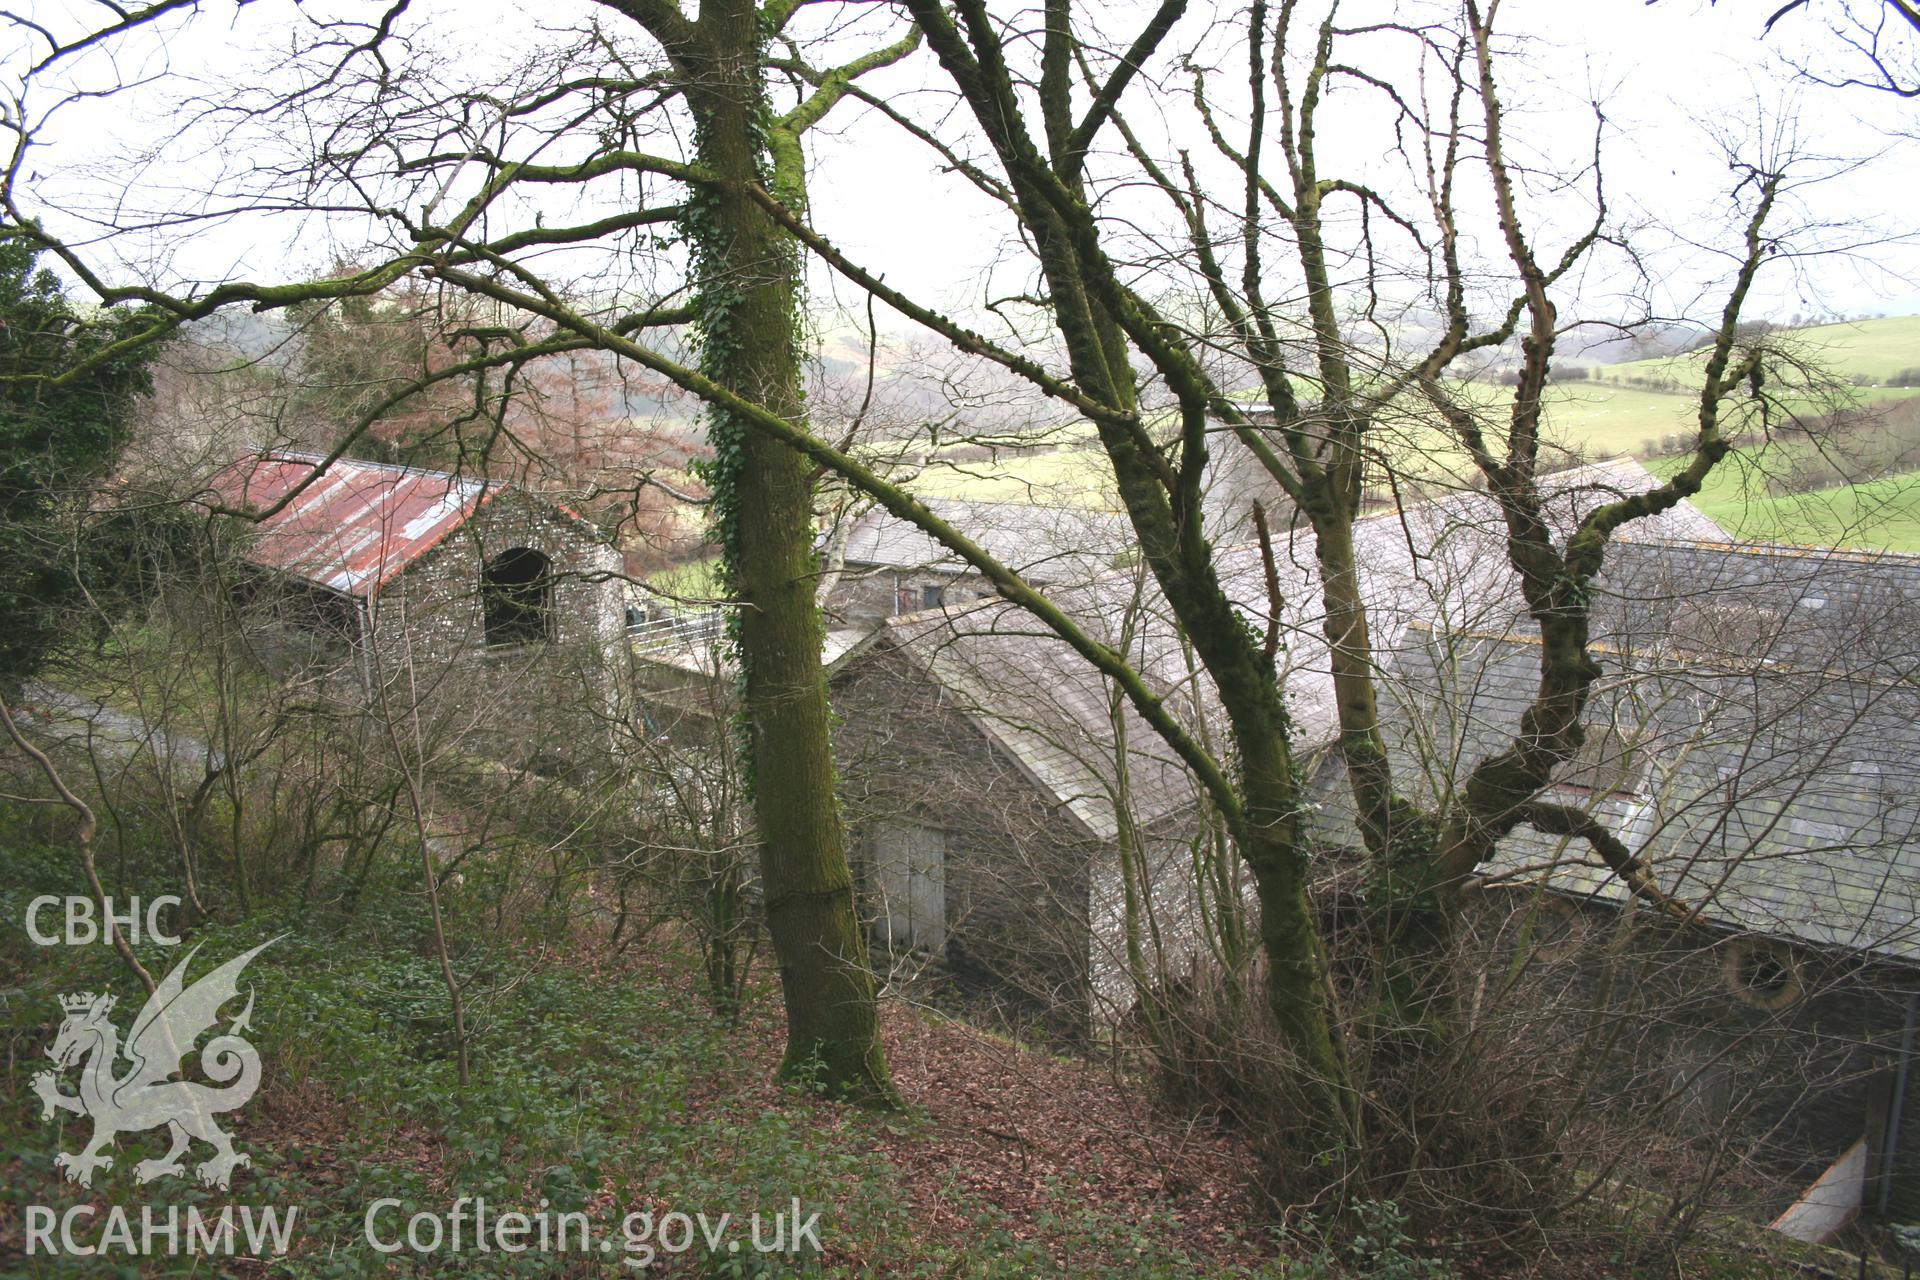 Exterior view of silage house, threshing house, covered yard and cattle shelter. Photographic survey of the exterior of the farm buildings at Tan-y-Graig Farm, Llanfarian, Aberystwyth. Conducted by Geoff Ward and John Wiles, 11th December 2006.